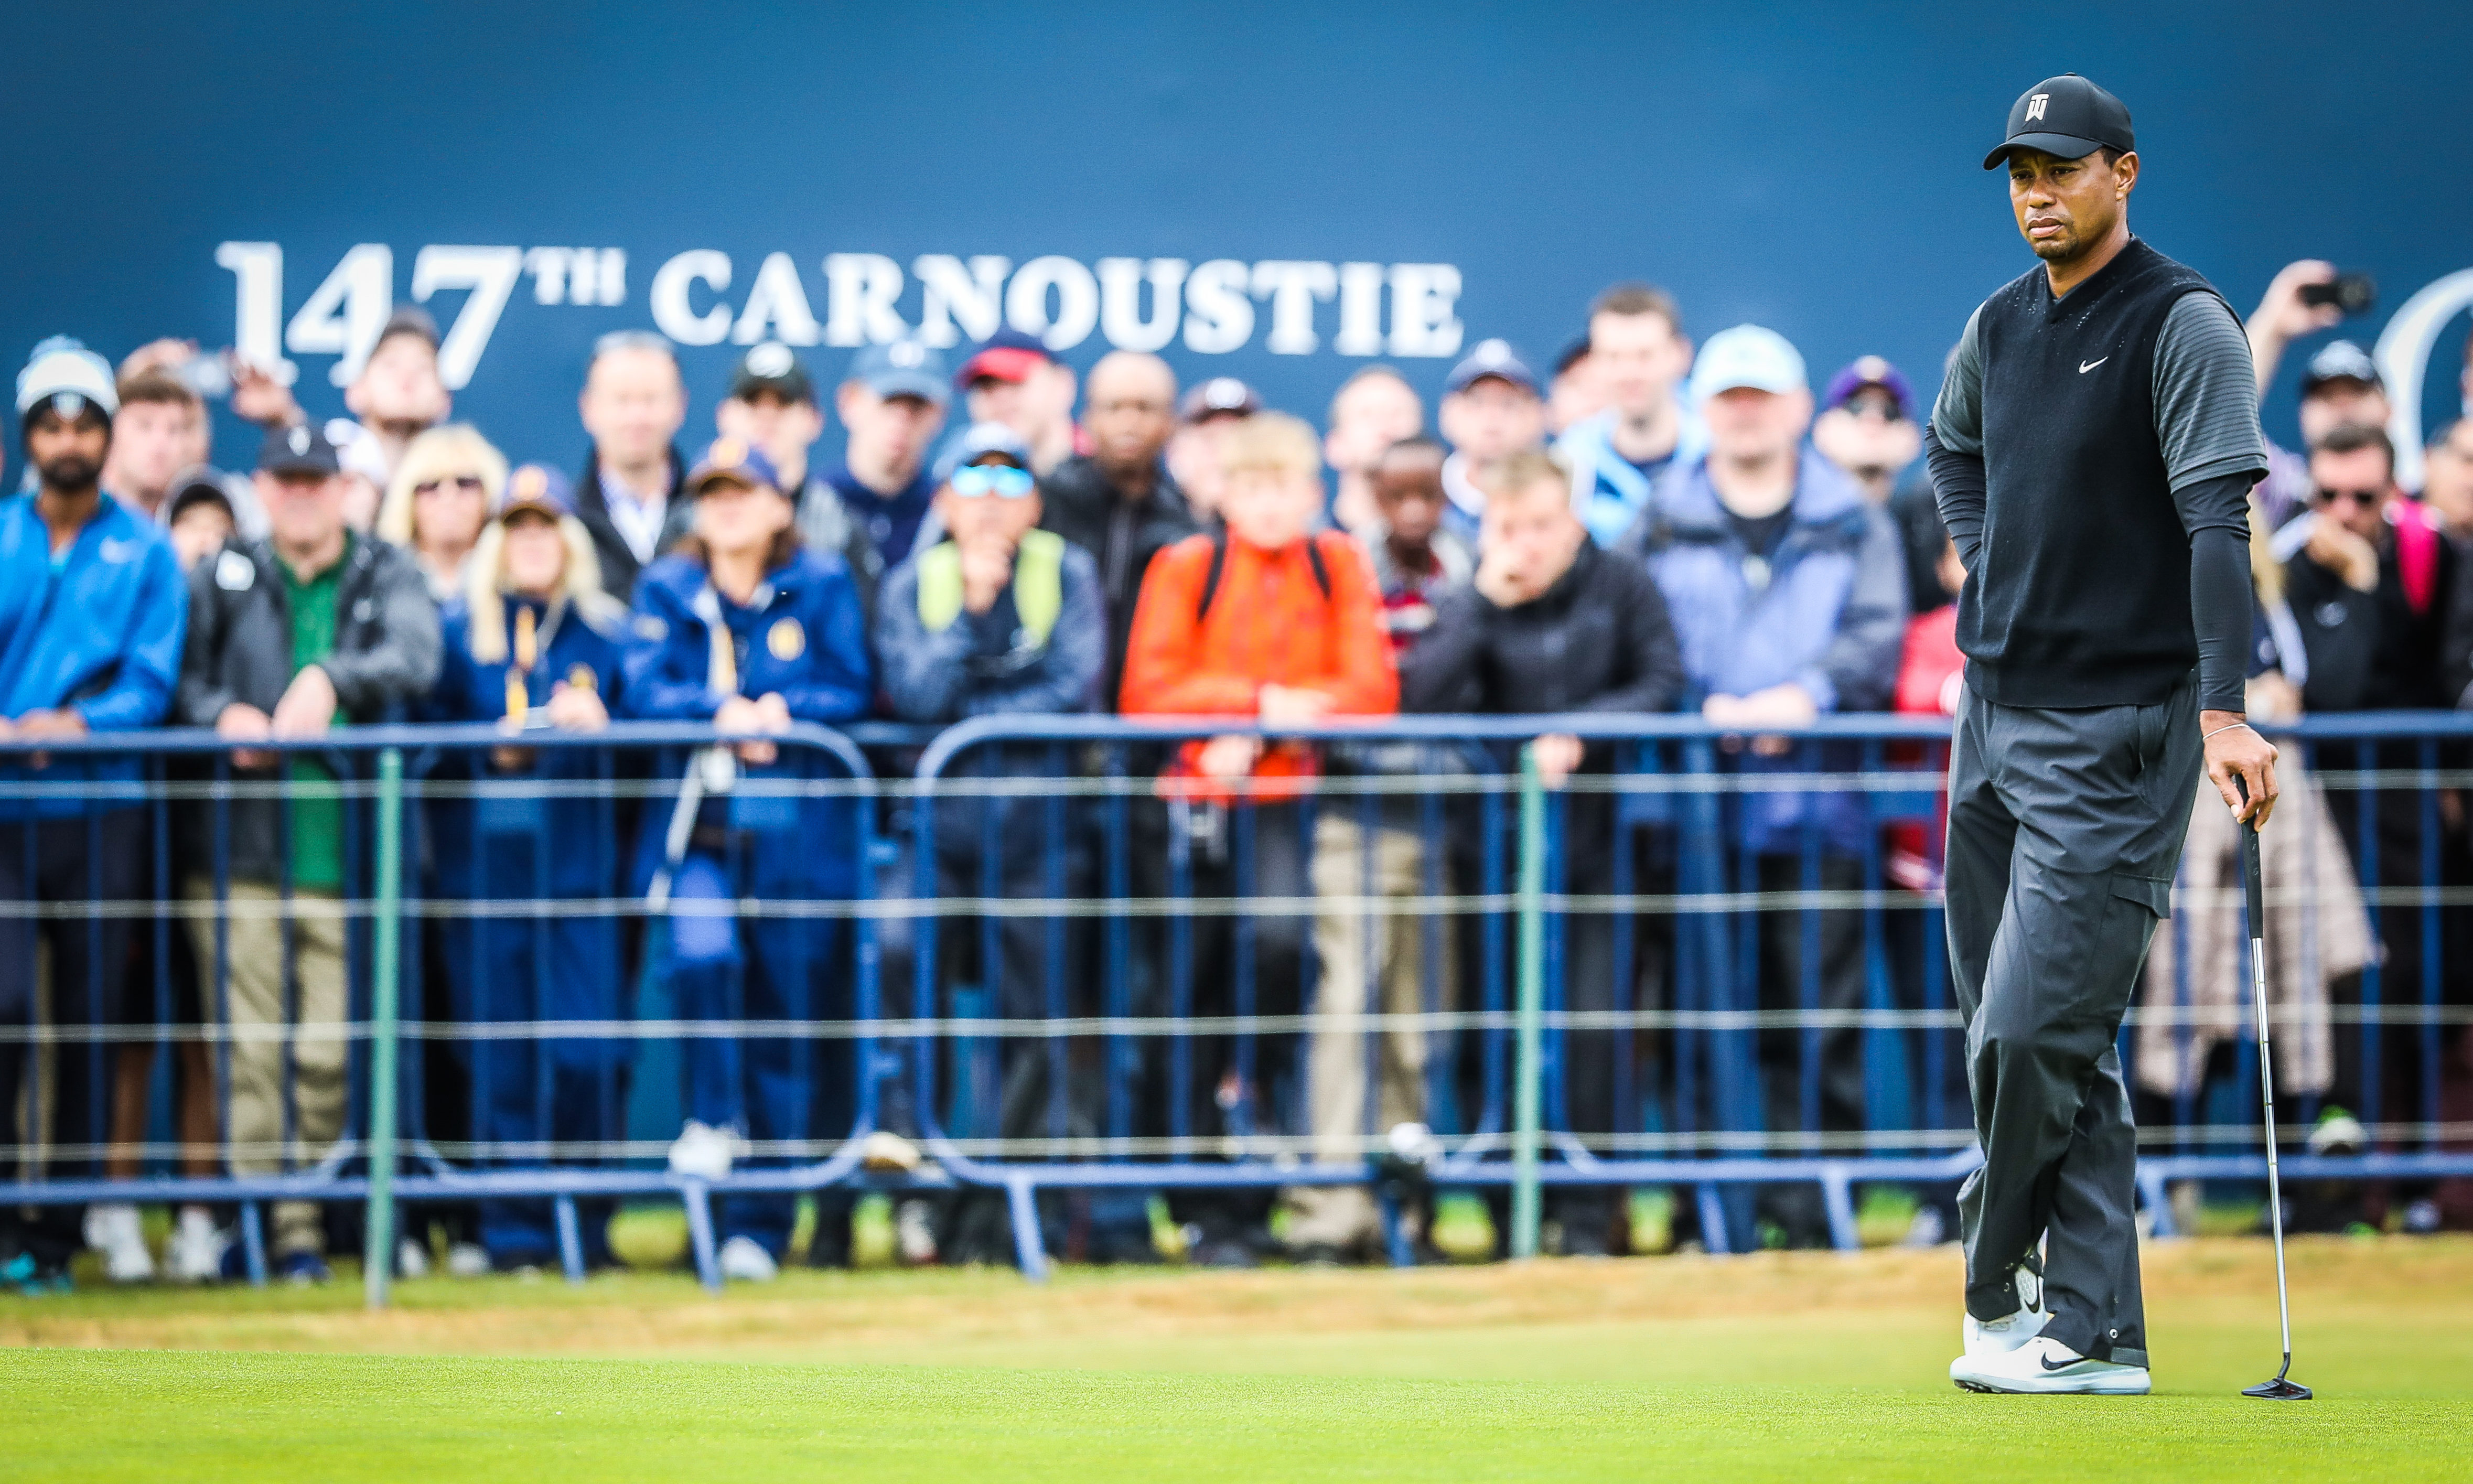 Tiger Woods playing at Carnoustie in 2018. Players from around the world flock to play the course..